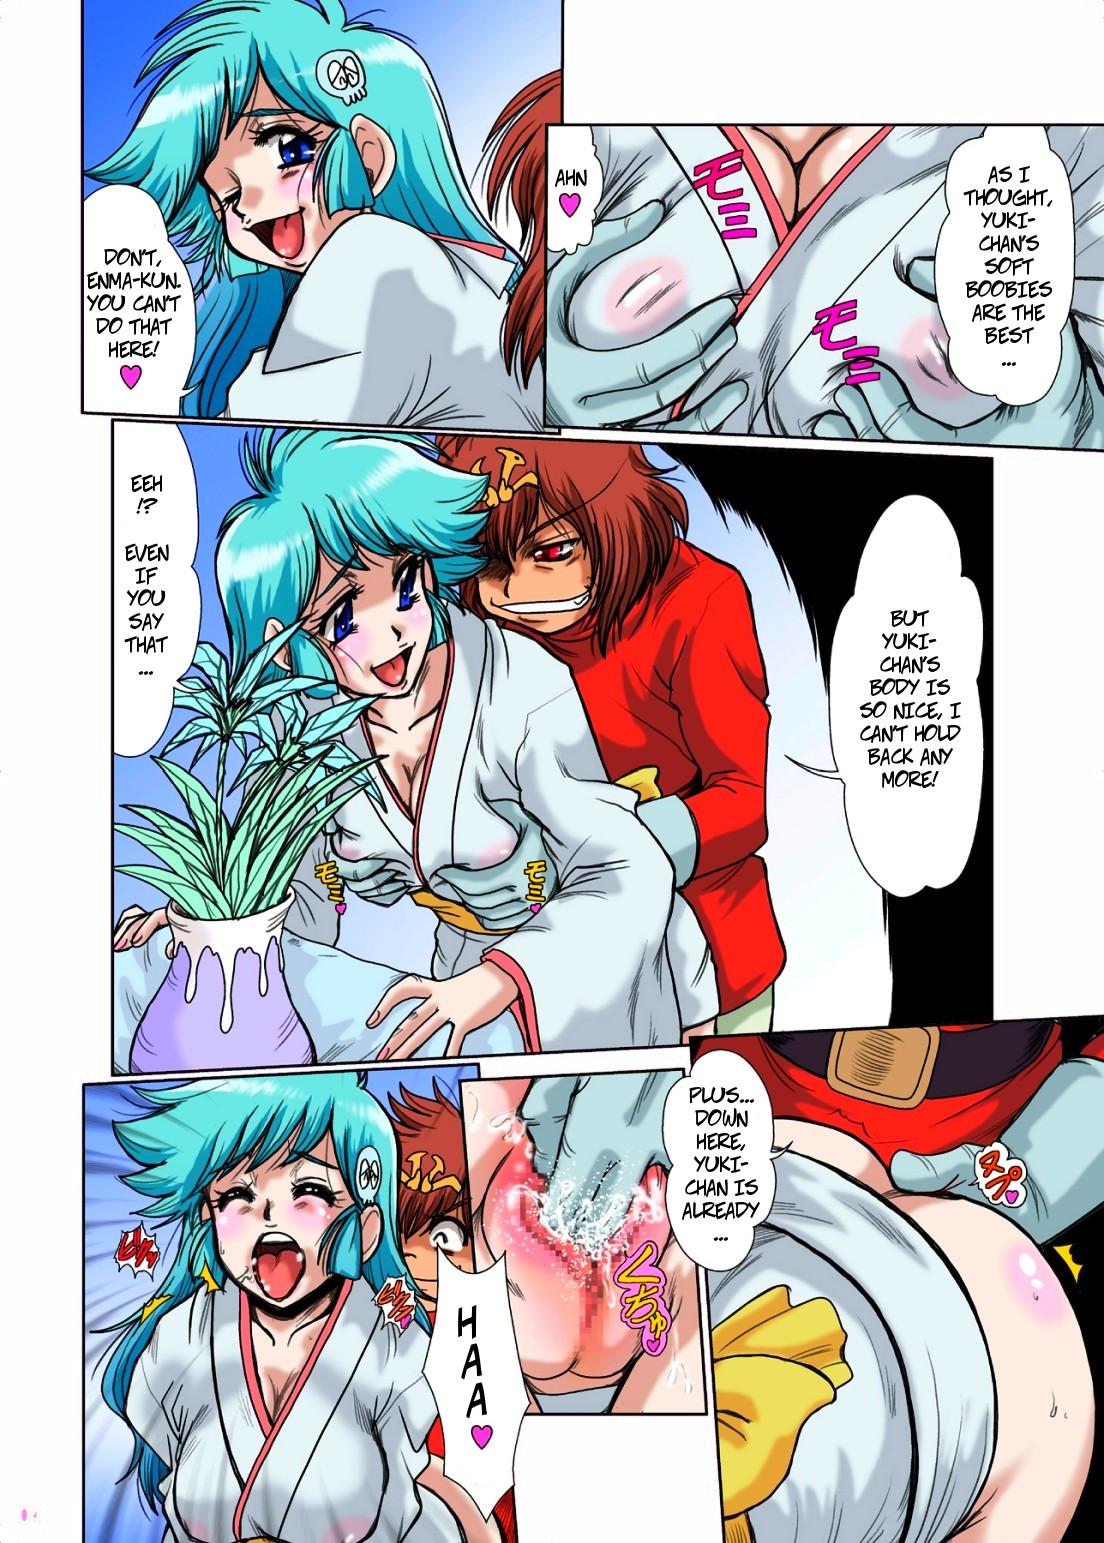 Fetiche Something Sexy This Way Comes - Dororon enma-kun Bucetinha - Page 3